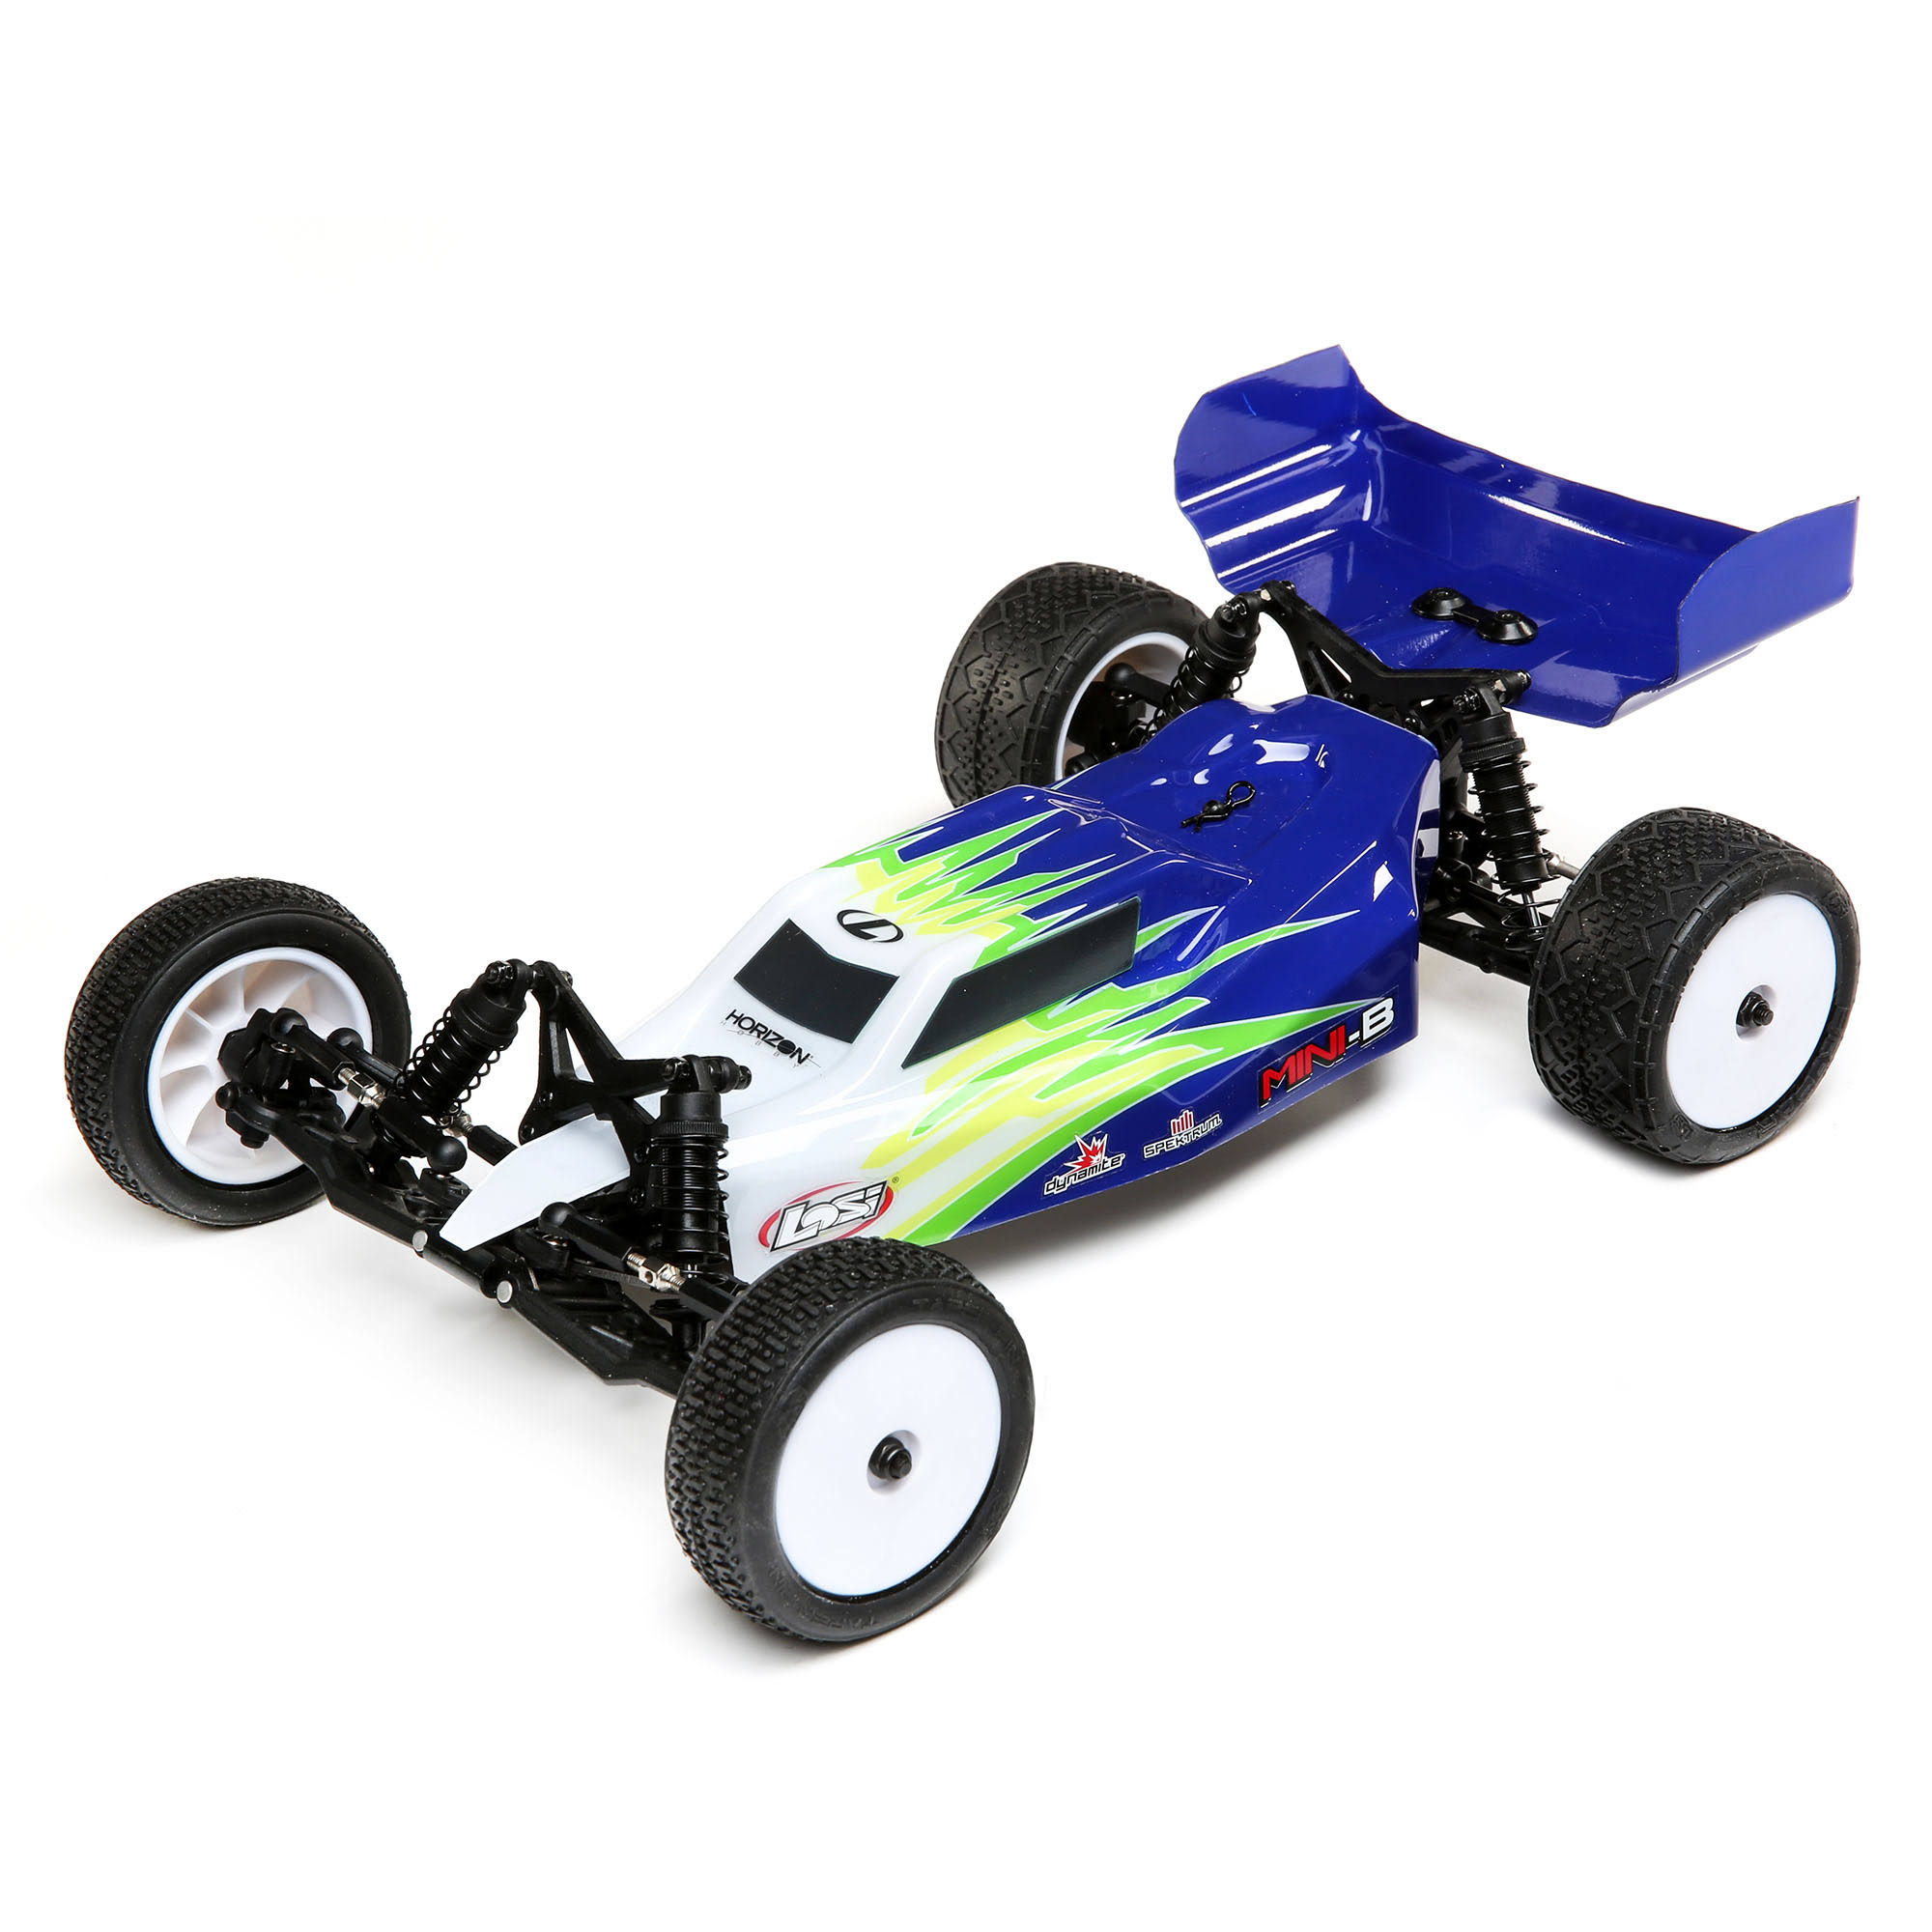 LOSI Mini-B Brushed Rtr 1/16 2WD Buggy Blue/White/LOS01016T1